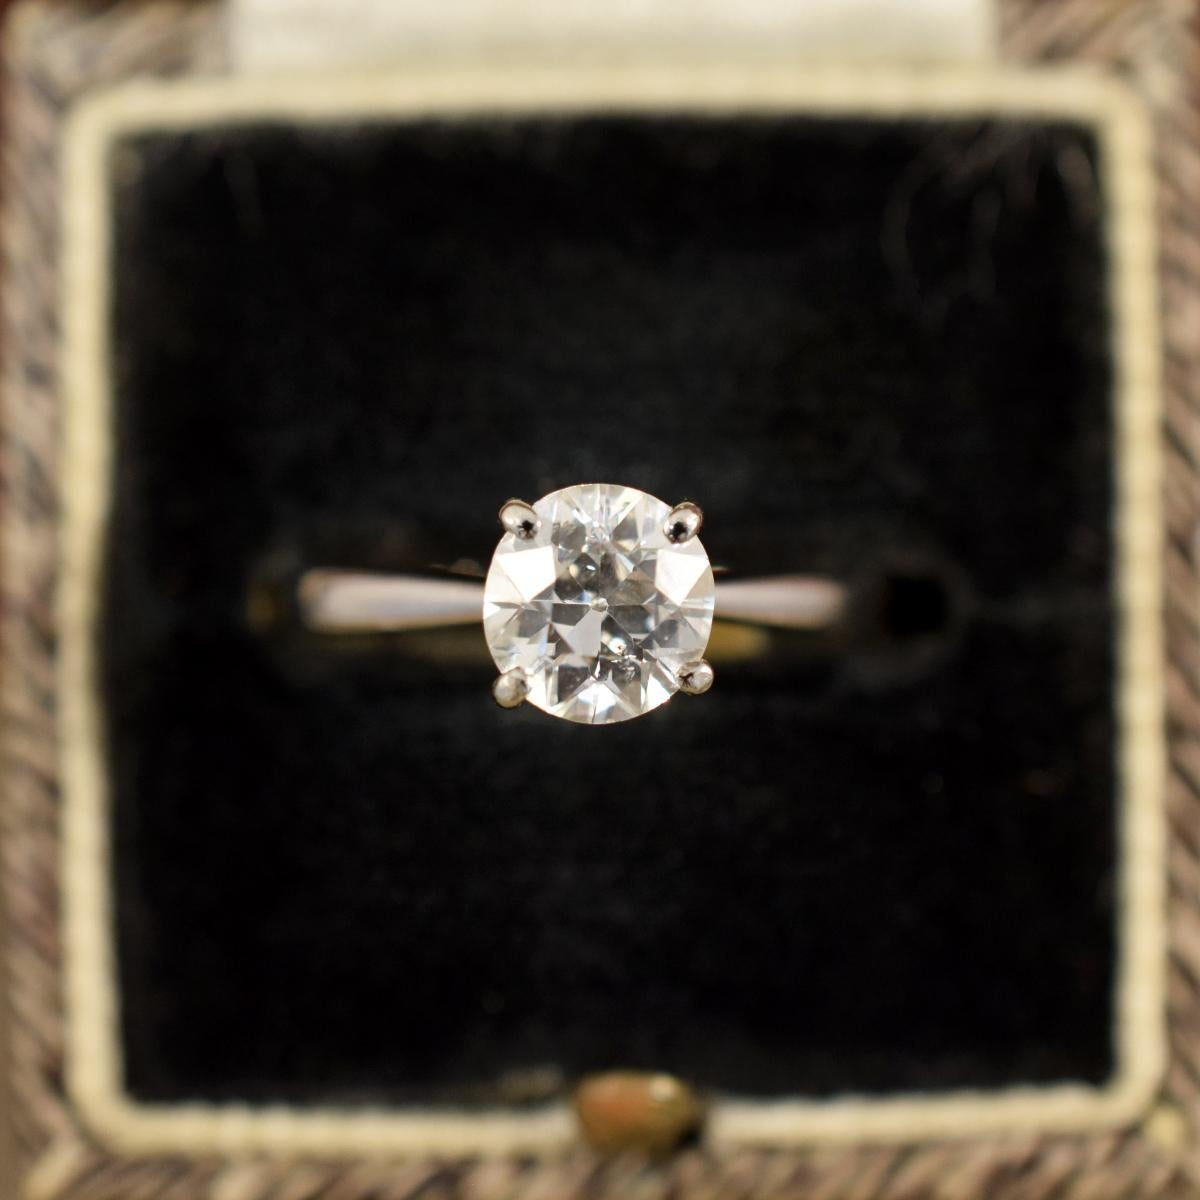 This beautifully sparkly engagement ring holds an Old European cut Diamond weighing 1.07ct and is set in 18ct White Gold in an four claw setting. A classic solitaire ring with style that stands the test of time.

If your resize option isn't there,